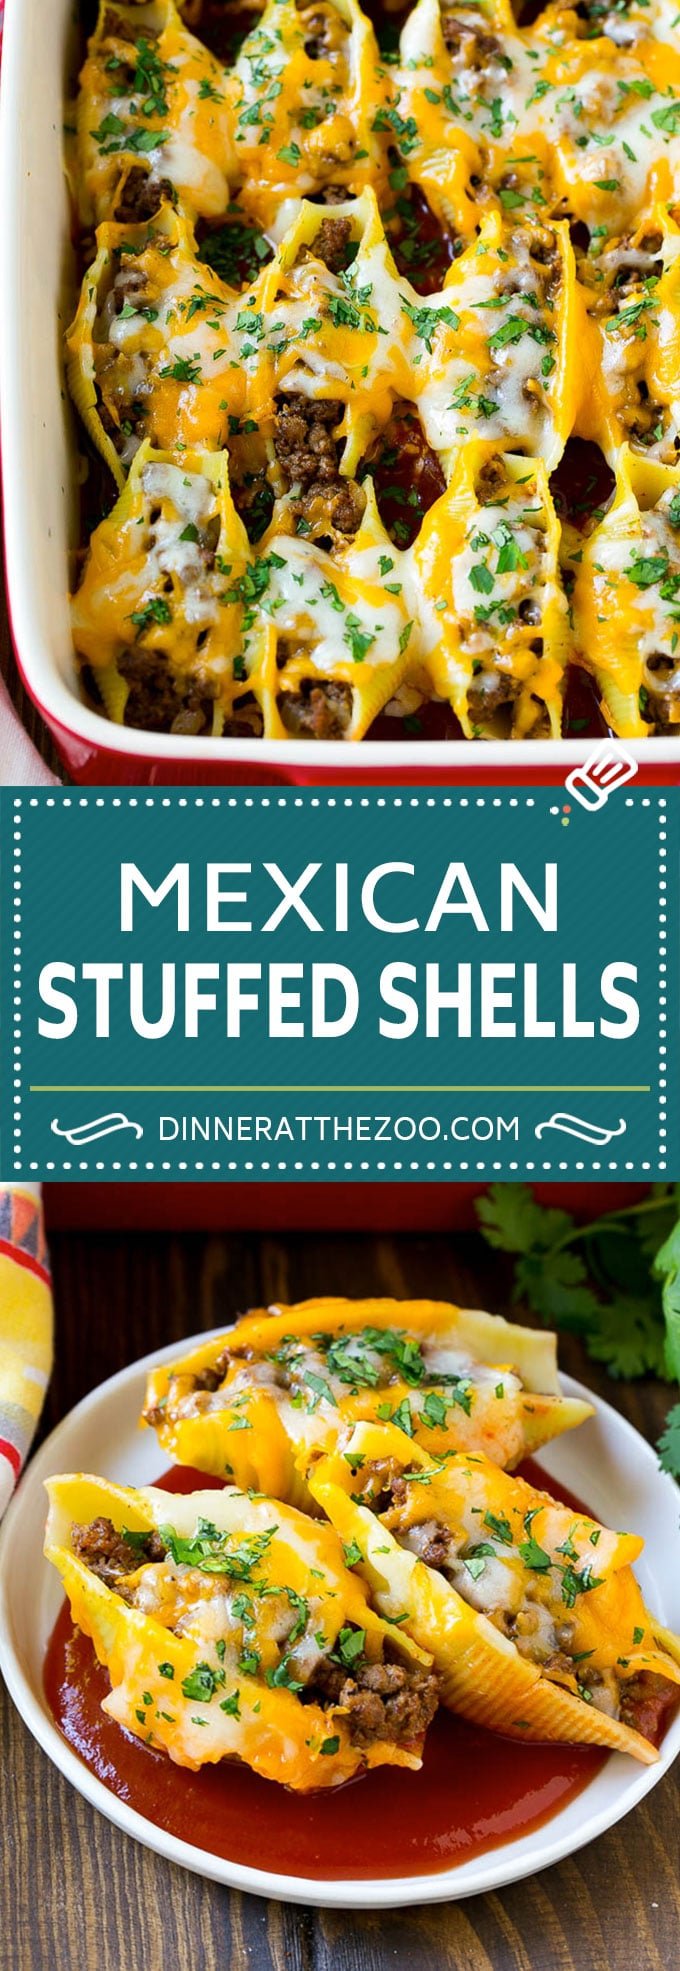 Mexican Stuffed Shells Recipe | Stuffed Shells | Mexican Pasta #dinner #pasta #mexican #beef #noodles #cheese #dinneratthezoo